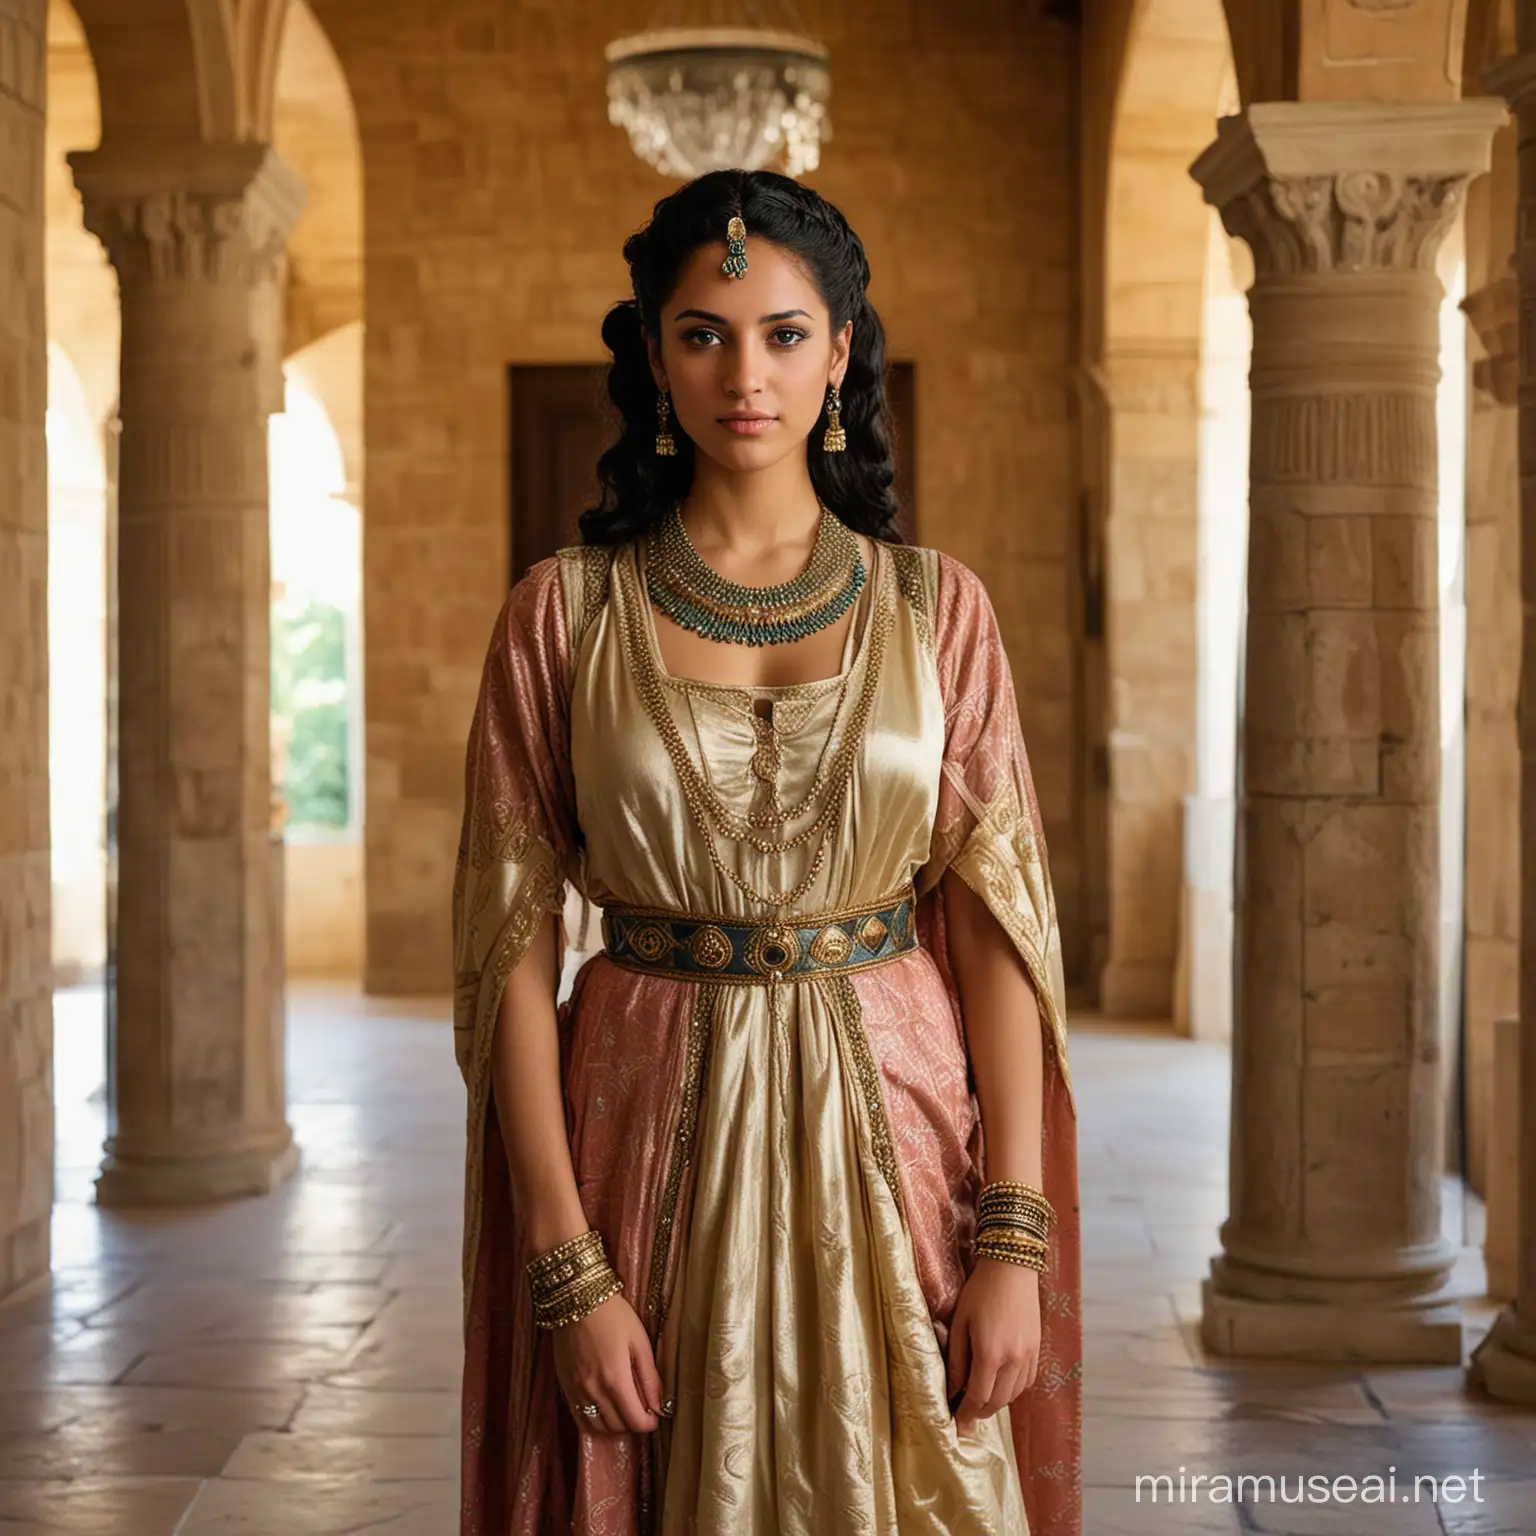 Photo in medieval-Roman style: A female Egyptian woman with a hairstyle like queen Cleopatra, 30 years old, dressed in noble, very airy medieval-Mediterranean silk clothing stands in a foyer of a medieval-Mediterranean dressed in noble, very airy medieval-Mediterranean silk clothing stands in a foyer of a medieval-Mediterranean villa in the colonial style. She has a self-confident but not unfriendly look. Sigma 85mm F/1.4